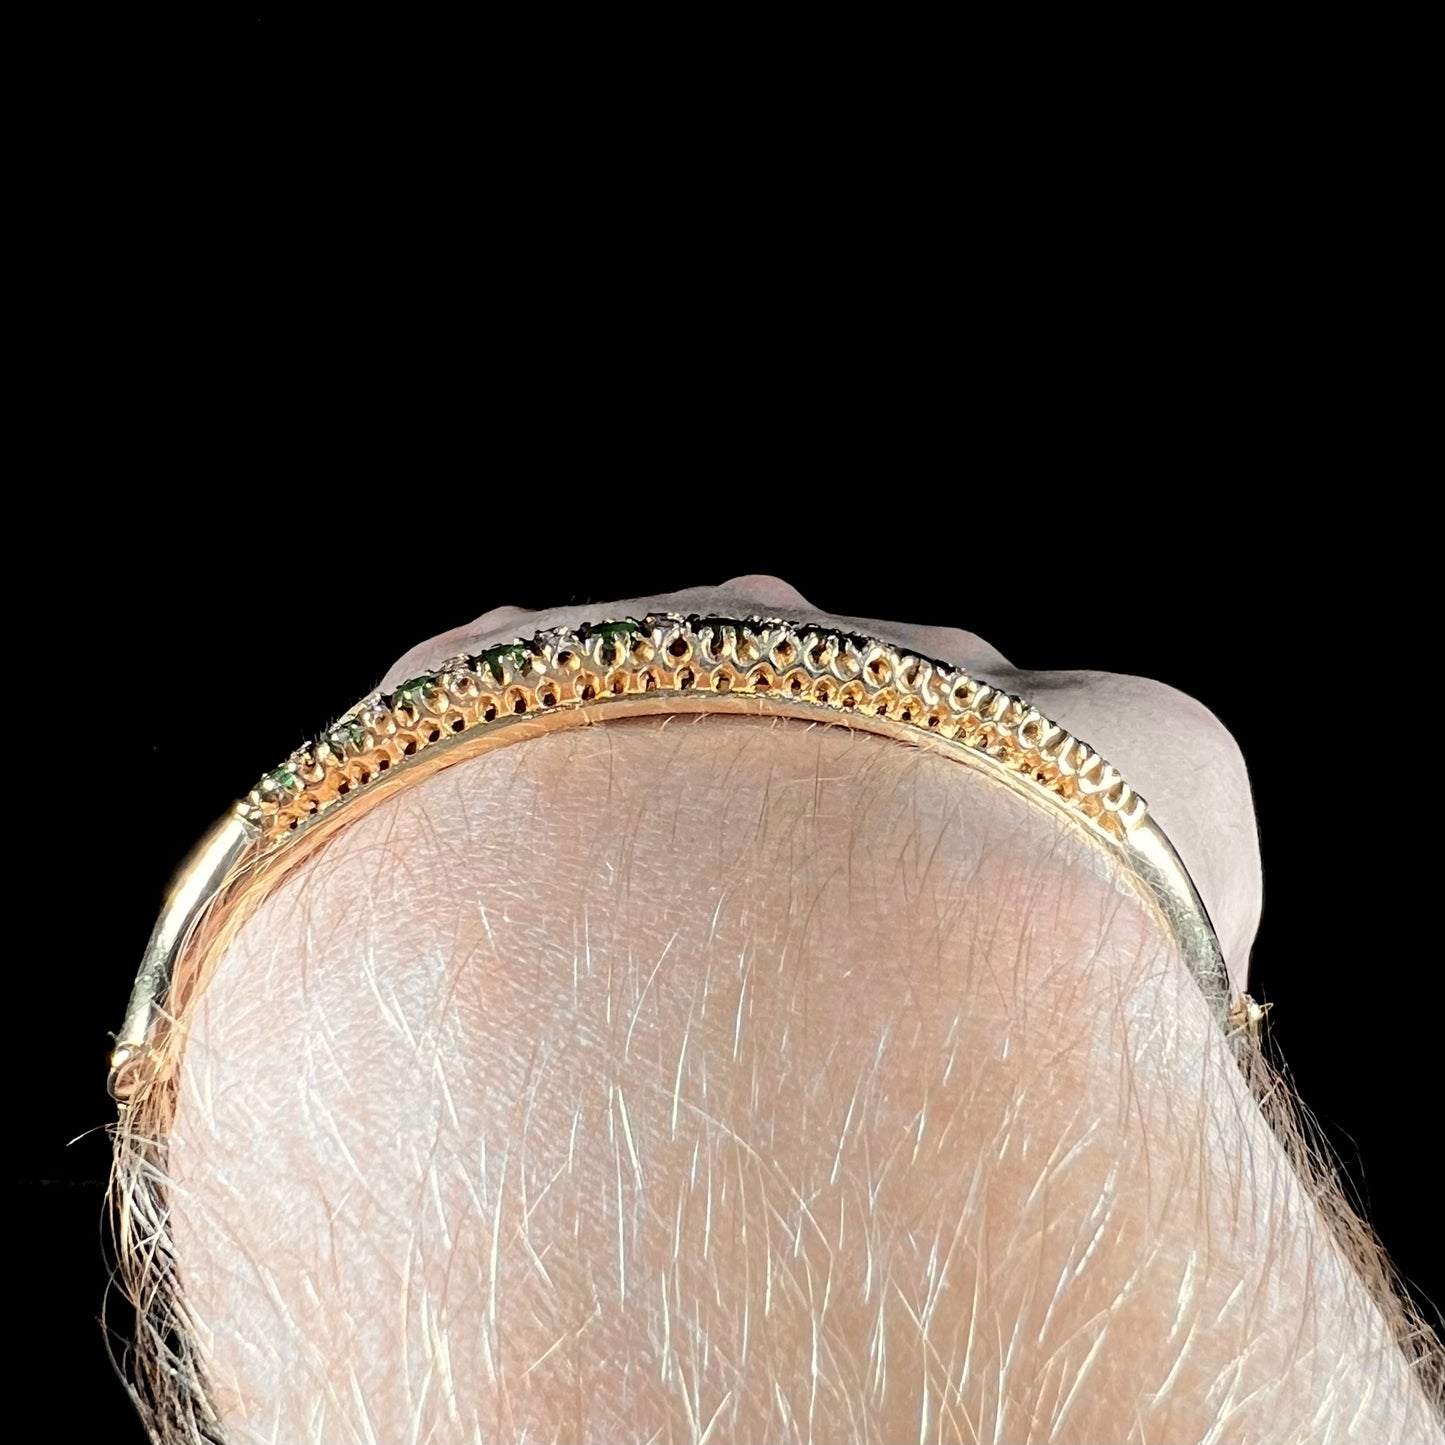 A ladies' yellow gold bangle bracelet set with round cut emeralds and diamonds.